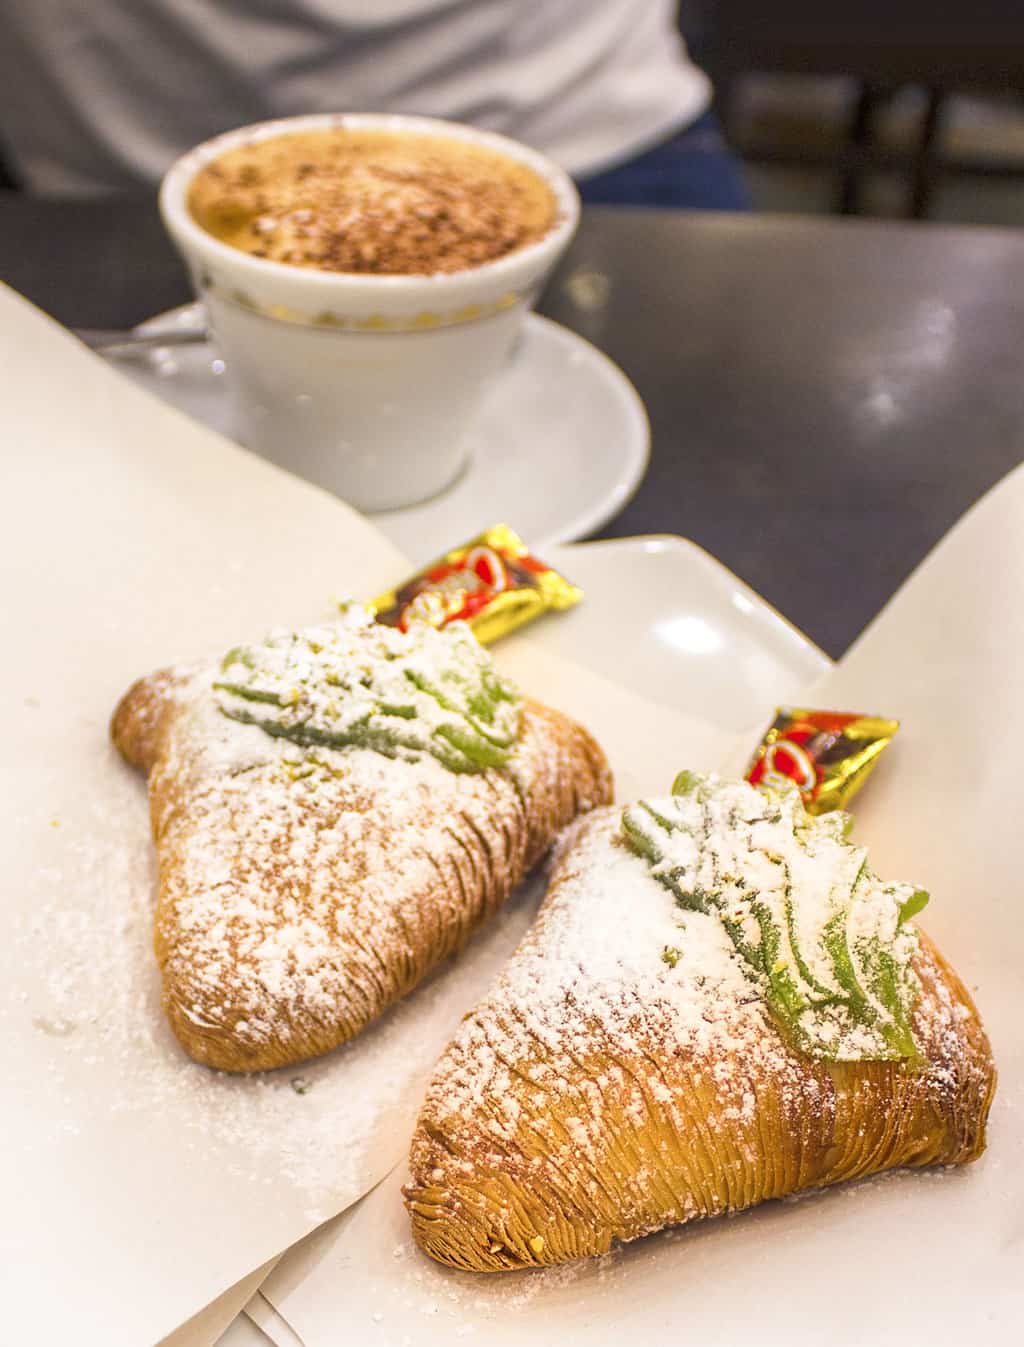 Two layered flaky pastries dusted with icing sugar called Sfogliatelle. They are a traditional pastry in Naples. There is also a cappuccino on the table.  